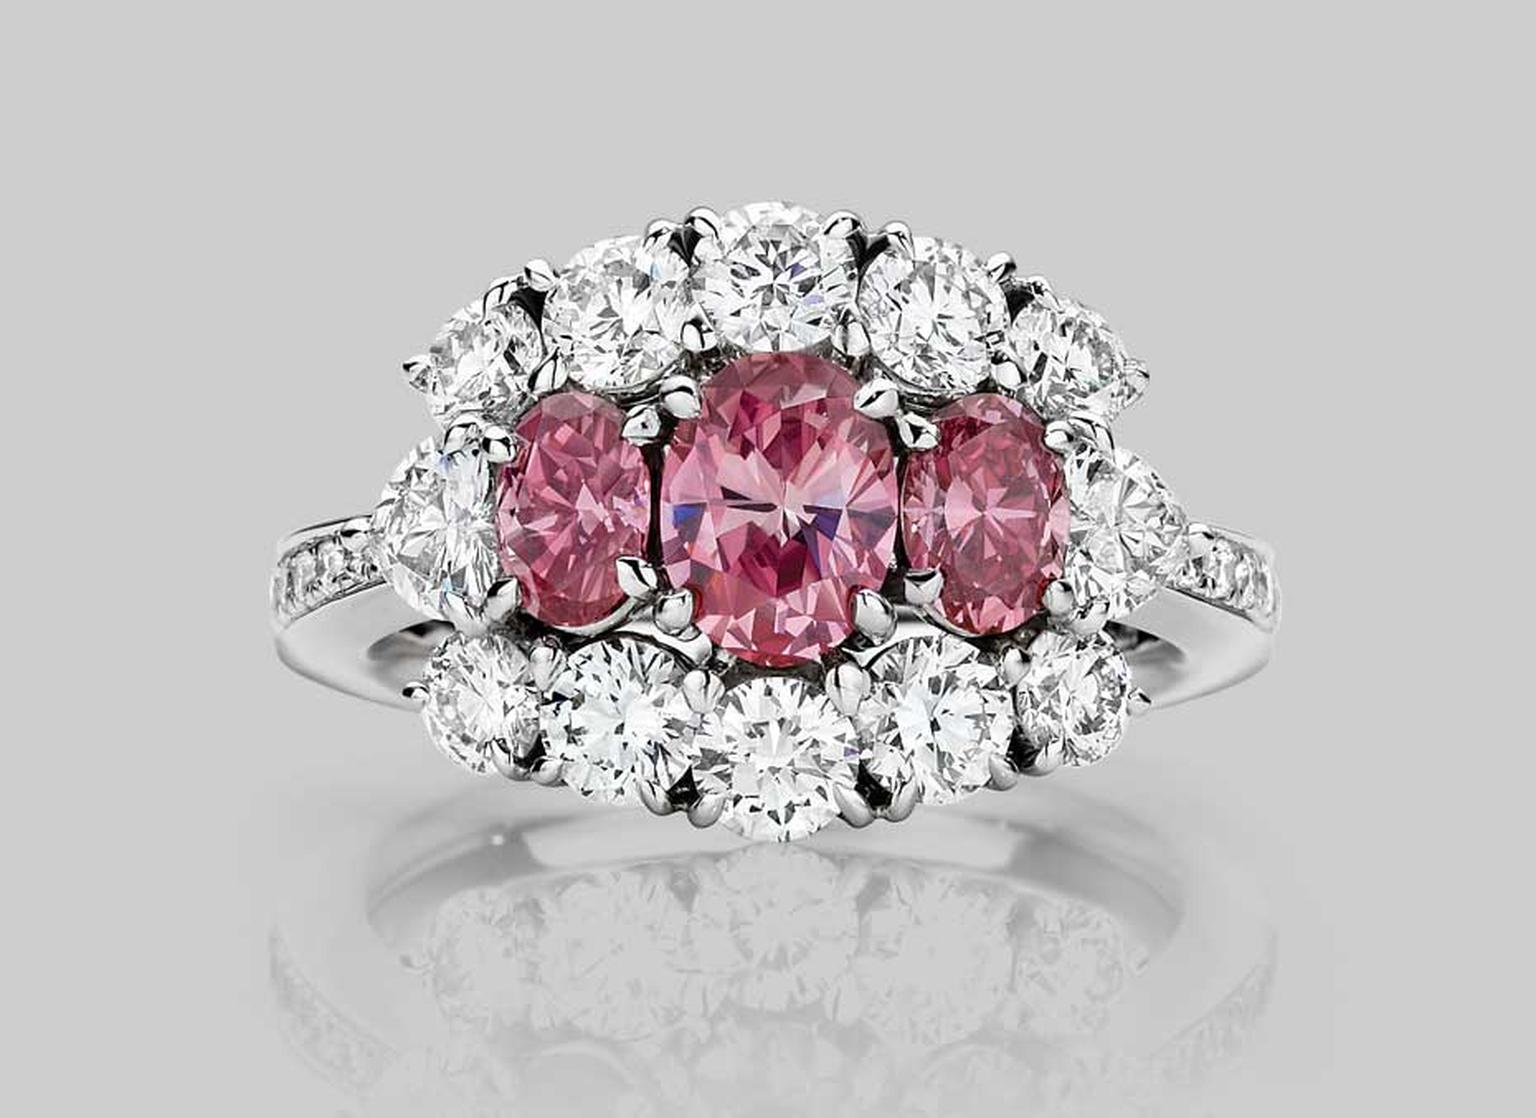 J. Farren-Price Trilogy 70th anniversary ring, with a trio of gems that feature a 0.59ct vivid purple pink, oval-cut Argyle diamond in the centre. Available at www.jfarrenprice.com.au.